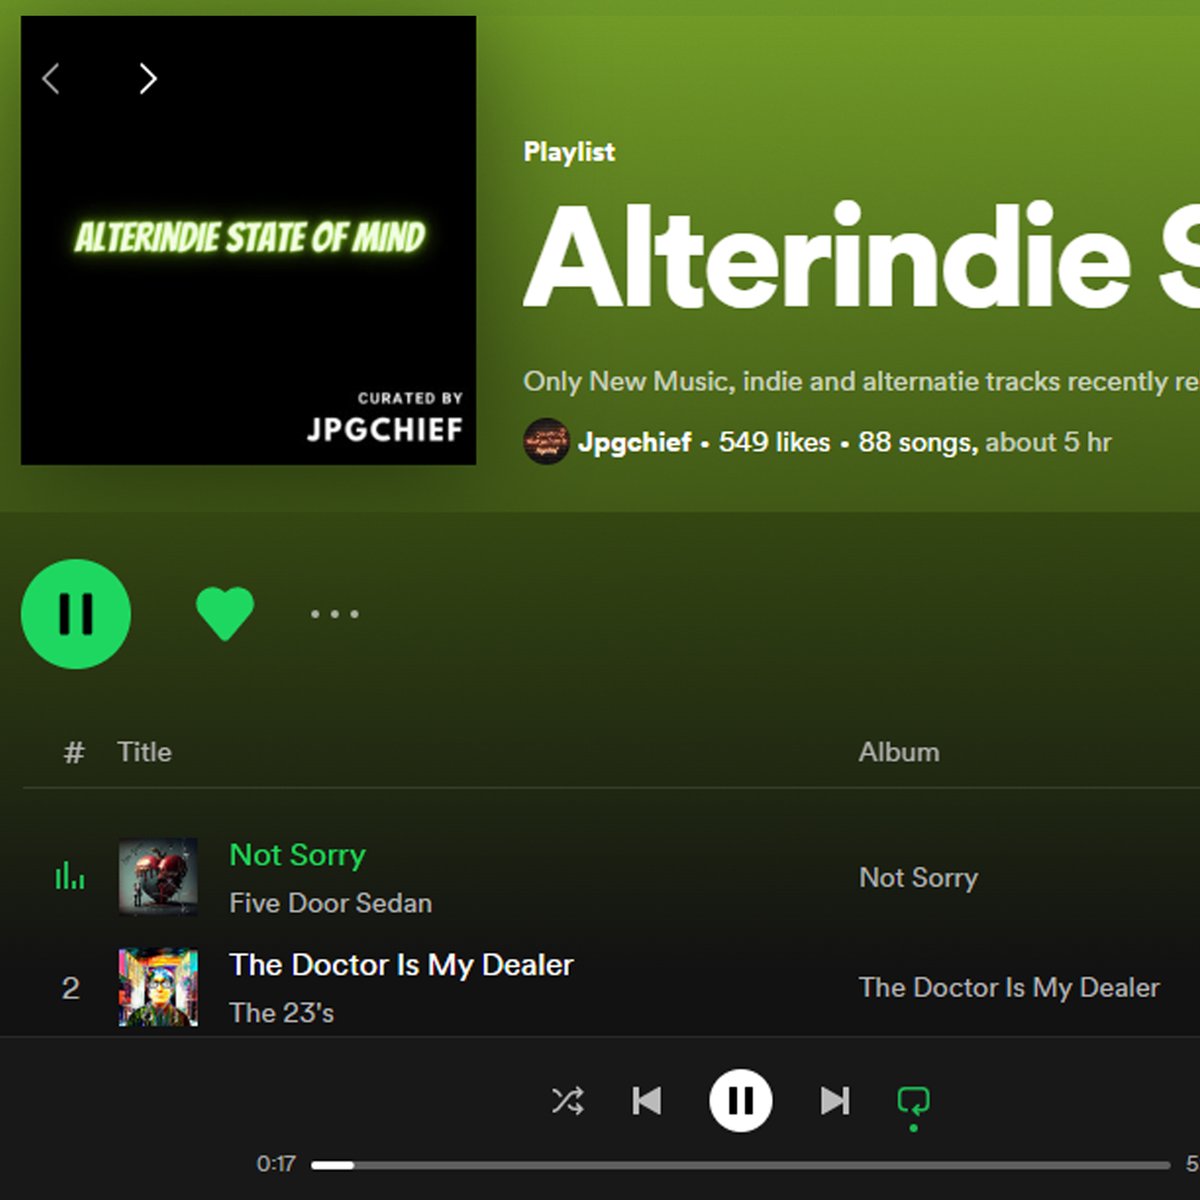 Thanks @Jpgchief for add to #alterindiestateofmind playlist #Spotify

(link) open.spotify.com/playlist/55m0c…

#The23s #thedoctorismydealer #NewRelease #NewArtist #NewMusic #23s #SpotifyPlaylist #playlistcurator #jpgchief #indierock #musician #bassist #guitarplayer #vocals  #sheffield #RT